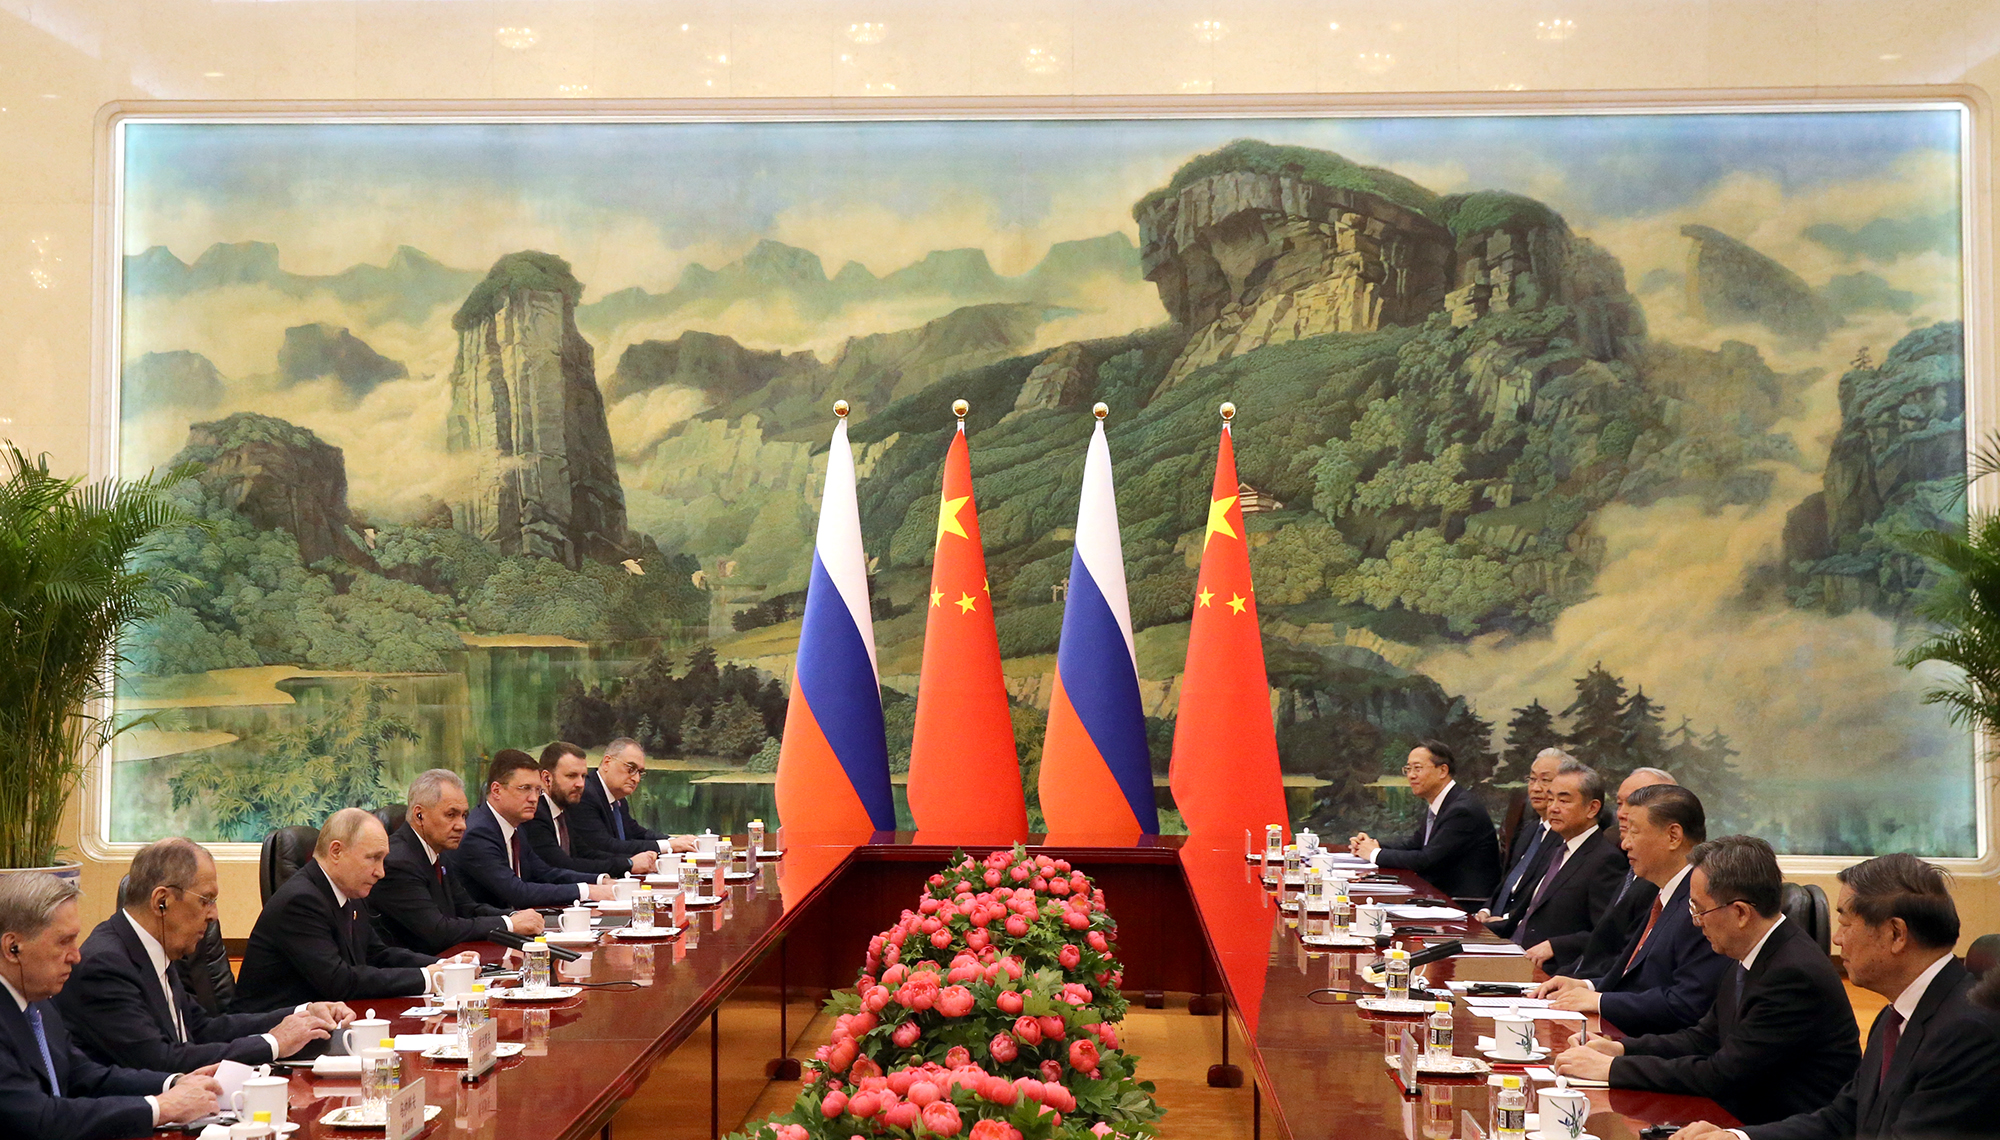 Russian President Vladimir Putin, third left, and Chinese President Xi Jinping, third right, attend a bilateral meeting in Beijing, China, on May 16.